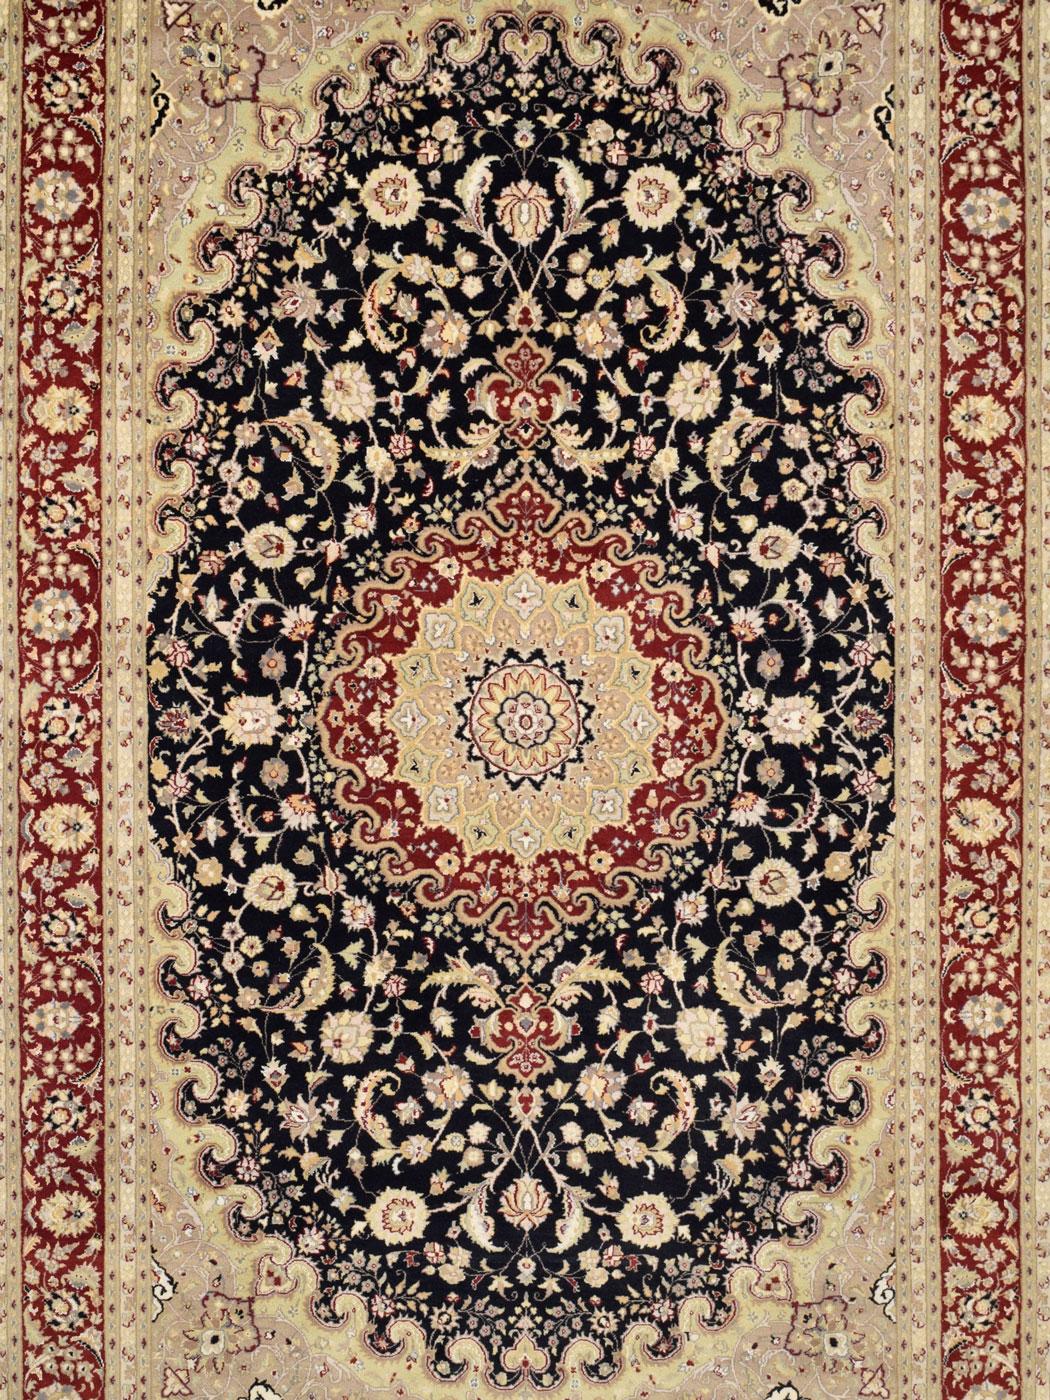 With a dramatic and mesmerizing central medallion, this formal Tabriz carpet measures 6’1”x9’7” and is hand-knotted in black, taupe, red, gold, and cream wool. Woven in Pakistan, this Tabriz design illustrates a flourishing Persian flower garden